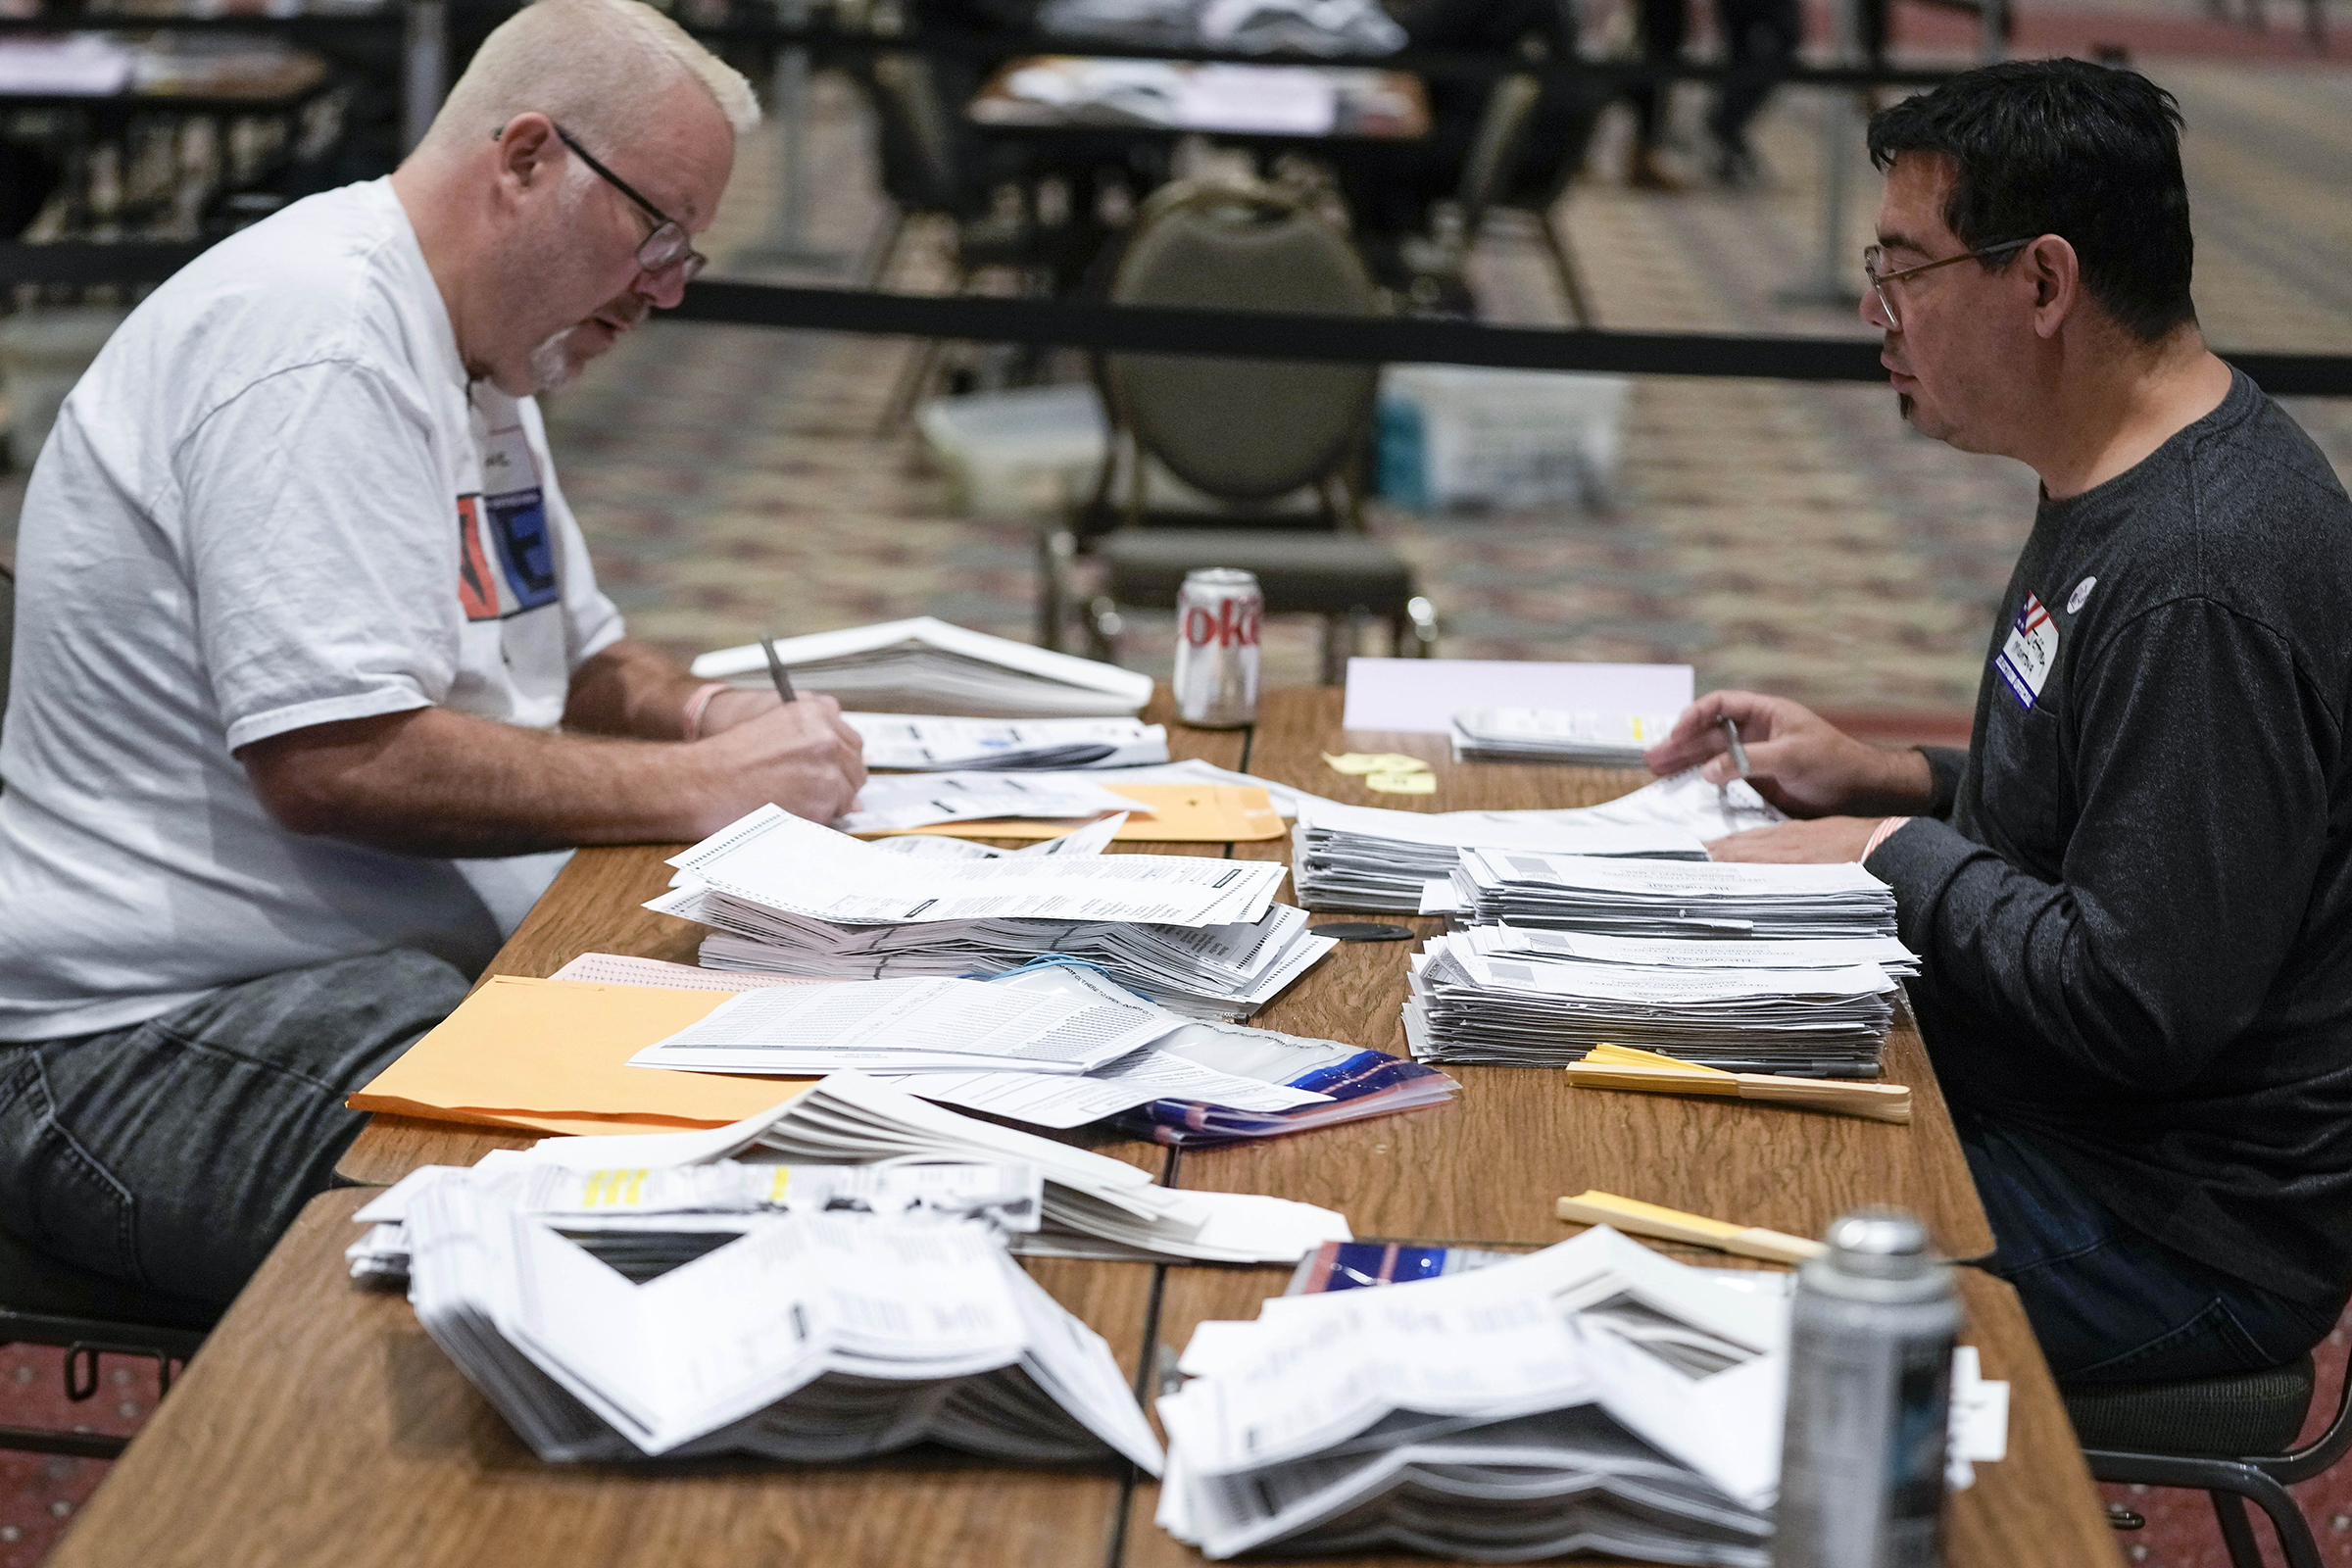 Workers count absentee ballots at the Wisconsin Center f